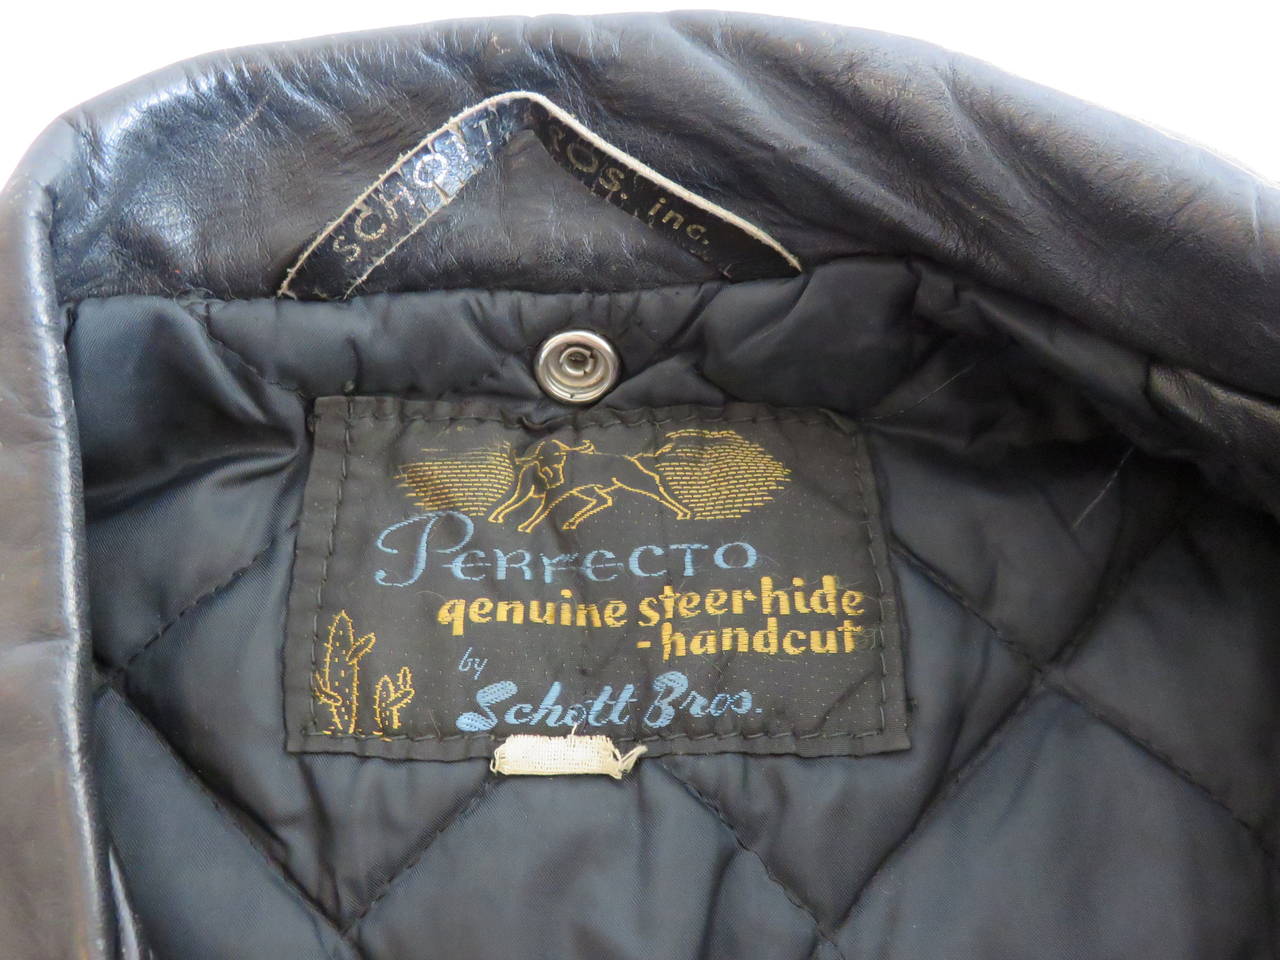 1960's SCHOTT BROS. USA Men's Perfecto leather motorcycle jacket For Sale 4